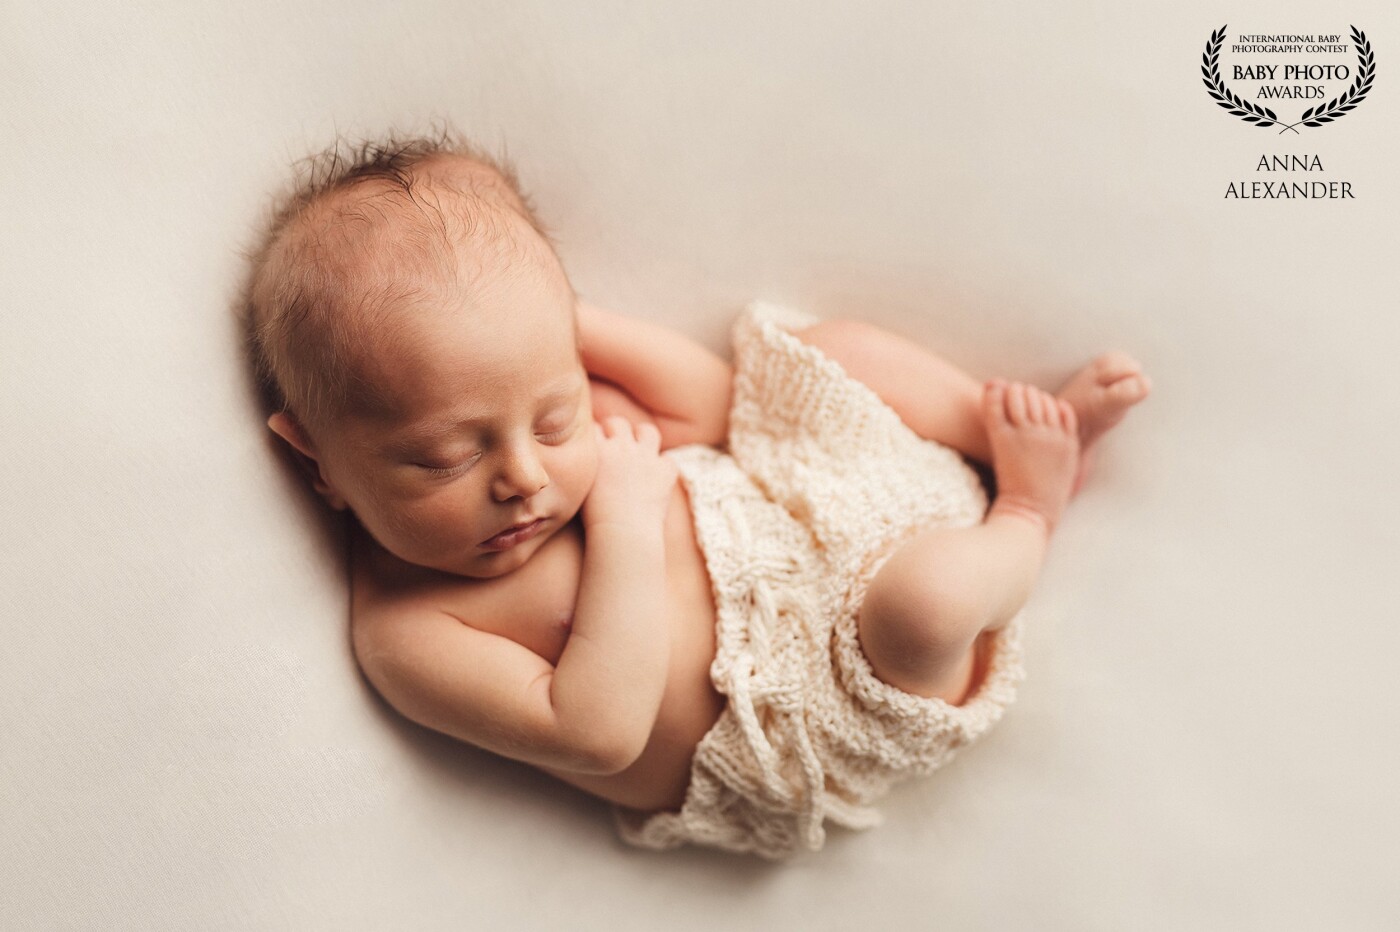 Curly and sweet newborn poses are forever my favourite! They last only first couple of weeks and are amazing to capture. Beauty in simplicity.